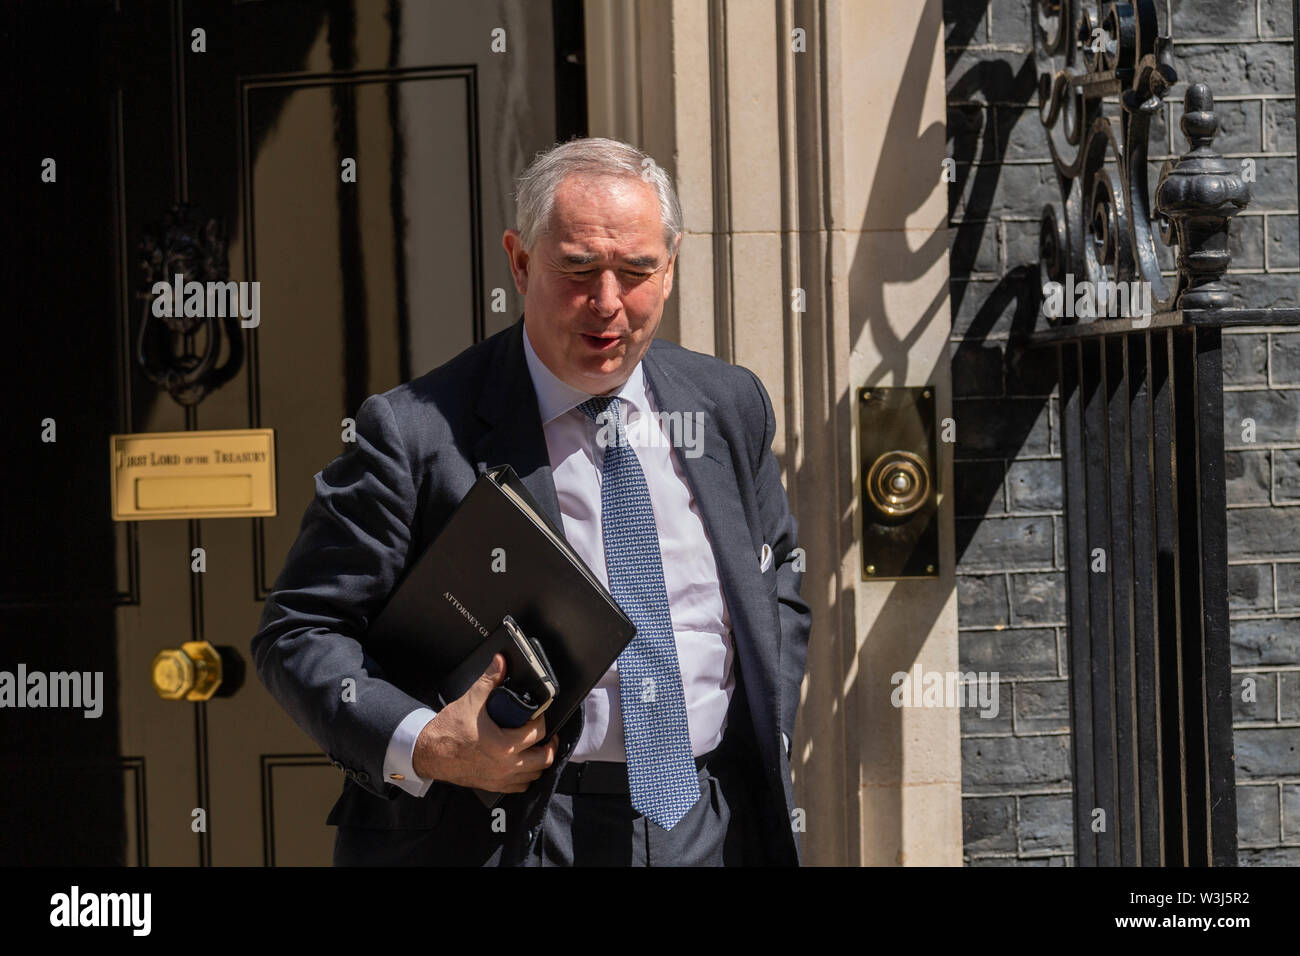 London, UK. 16th July 2019, Geoffrey Cox QC MP leaves a Cabinet meeting at 10 Downing Street, London Credit Ian Davidson/Alamy Live News Stock Photo